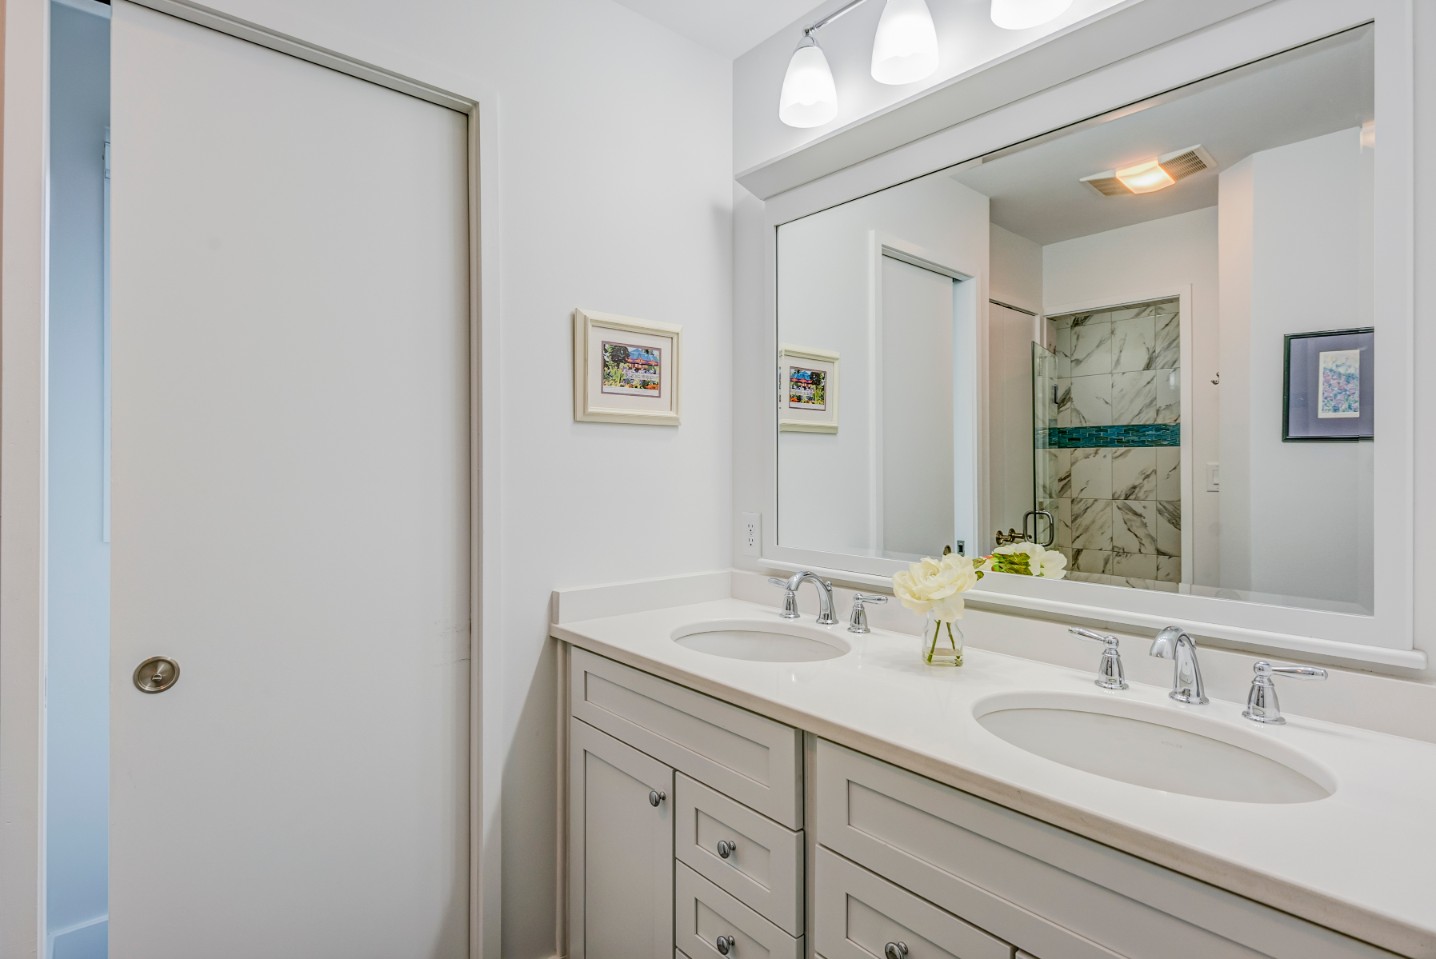 Cotton Patch Hills Bathroom Remodel Vol.2 in Bethany Beach DE with Two Sinks and White Shaker Cabinets